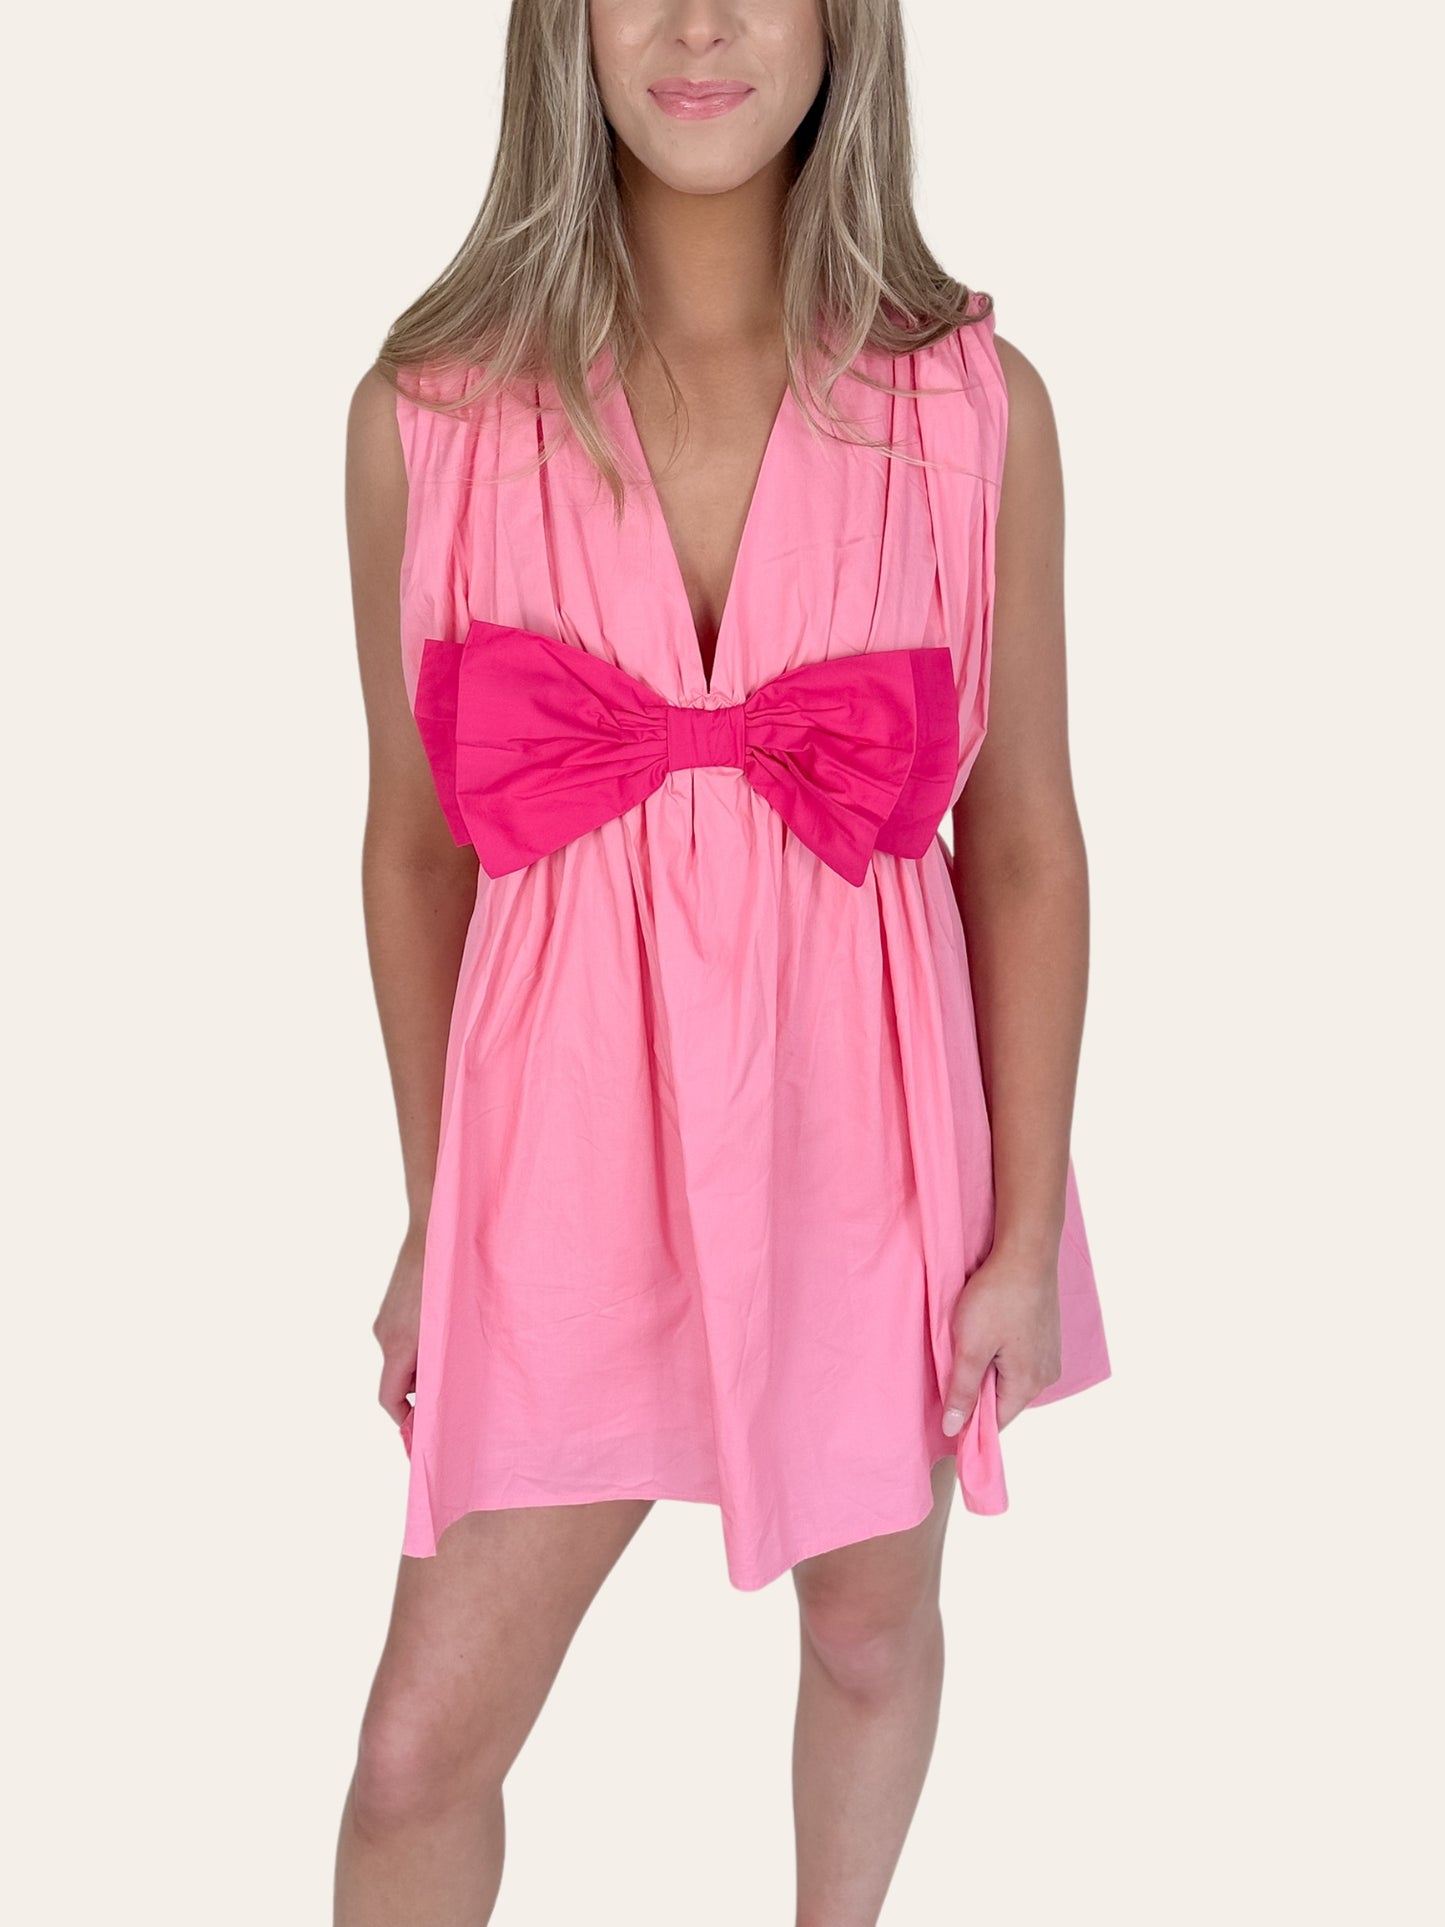 Shades Of Pink Romper